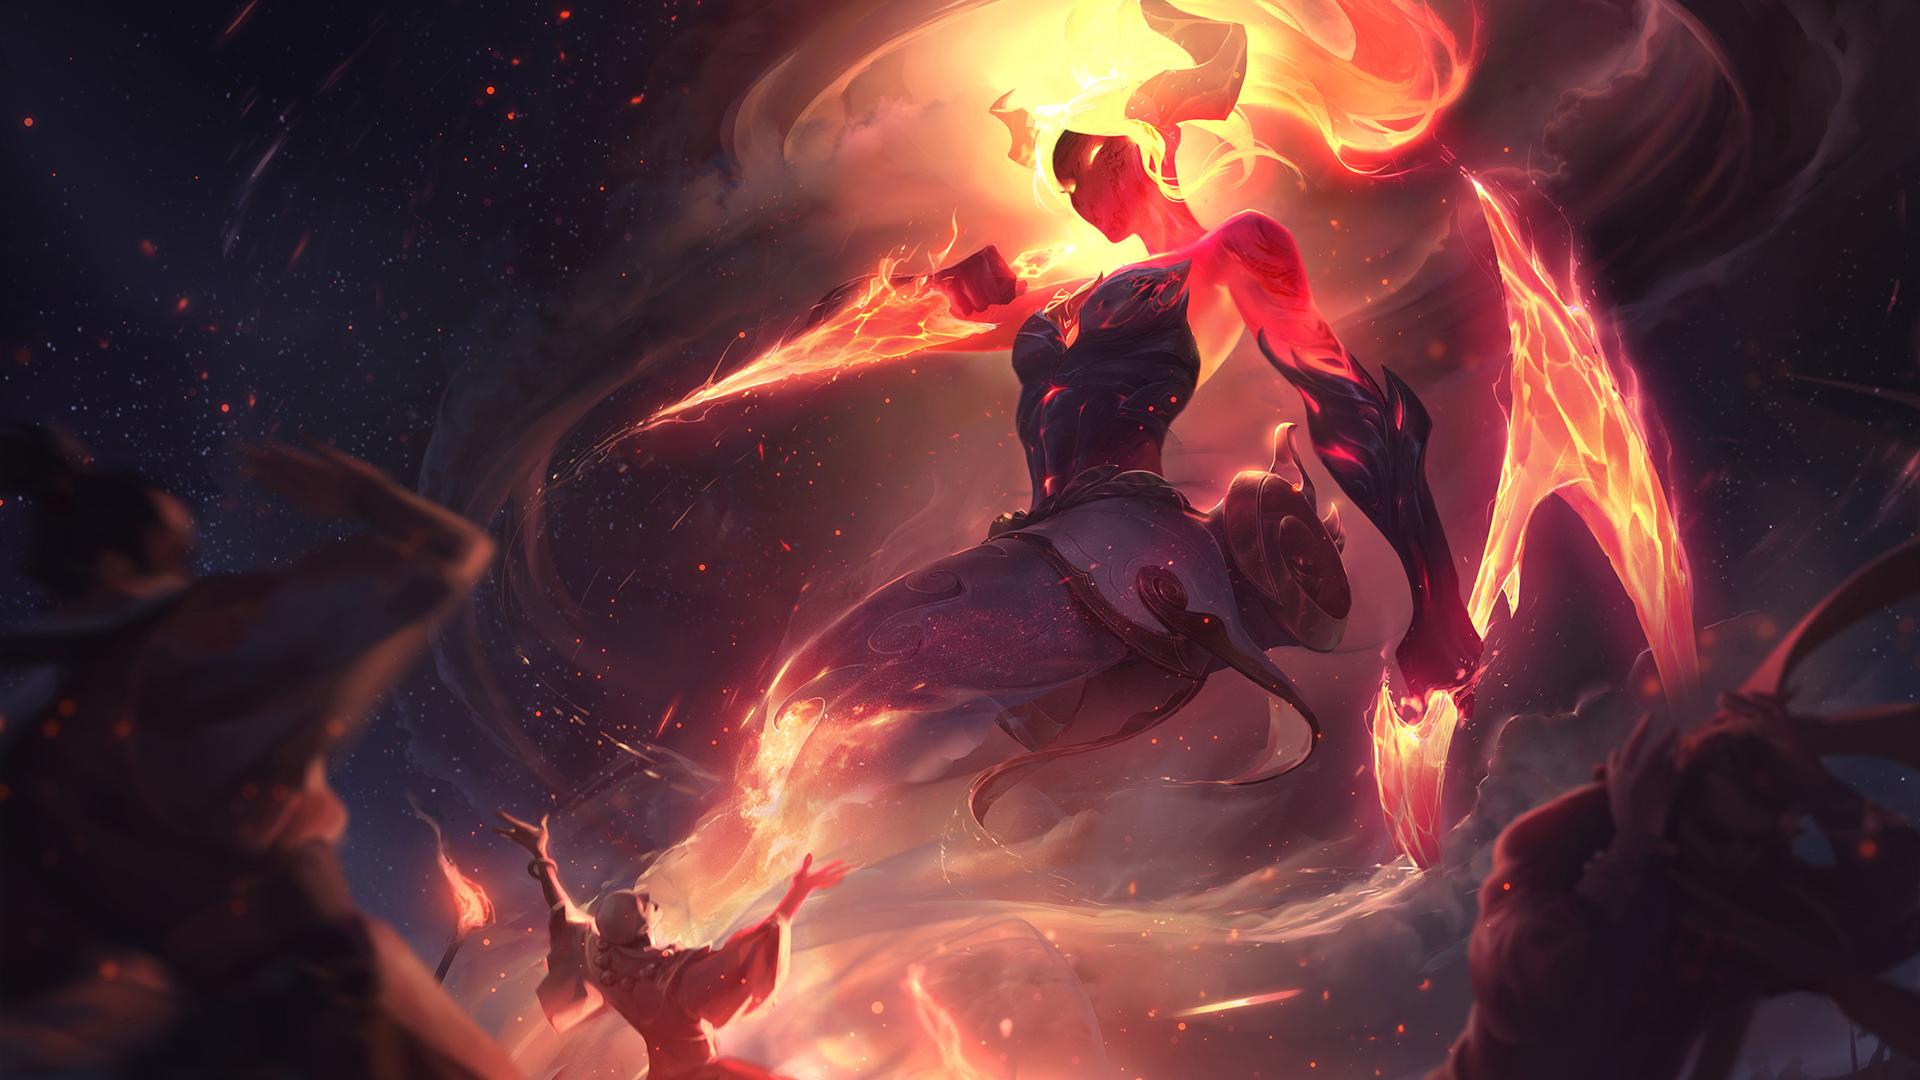 The New Akali splashes are hands down some of your best